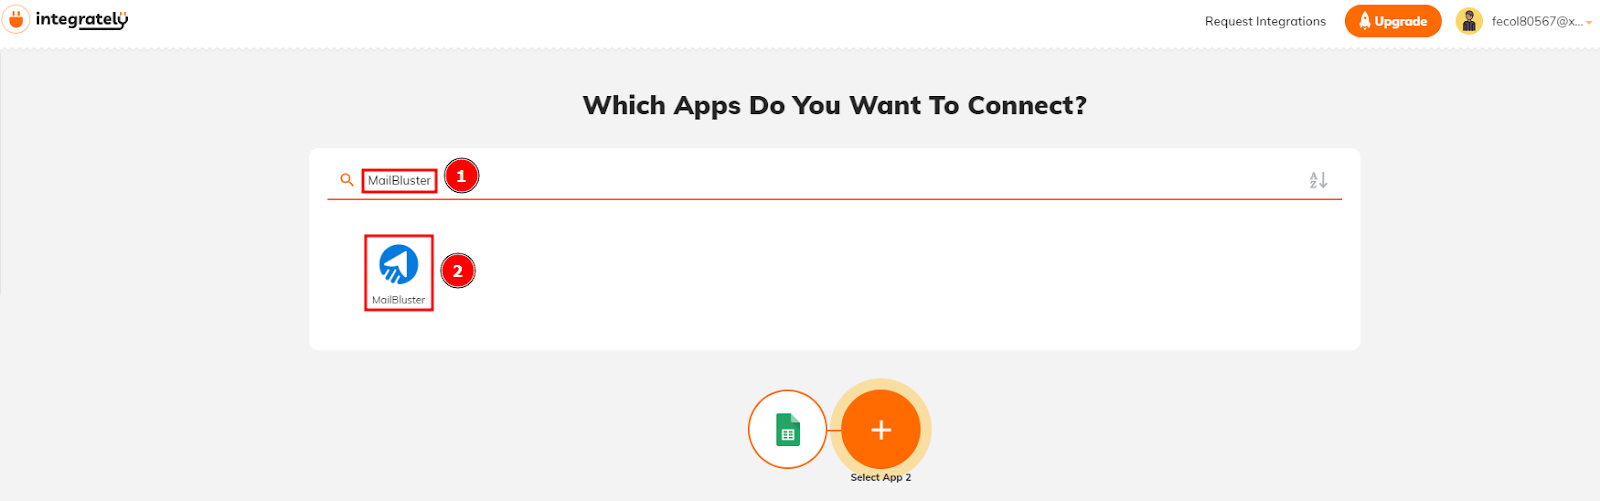 Connecting apps using Integrately